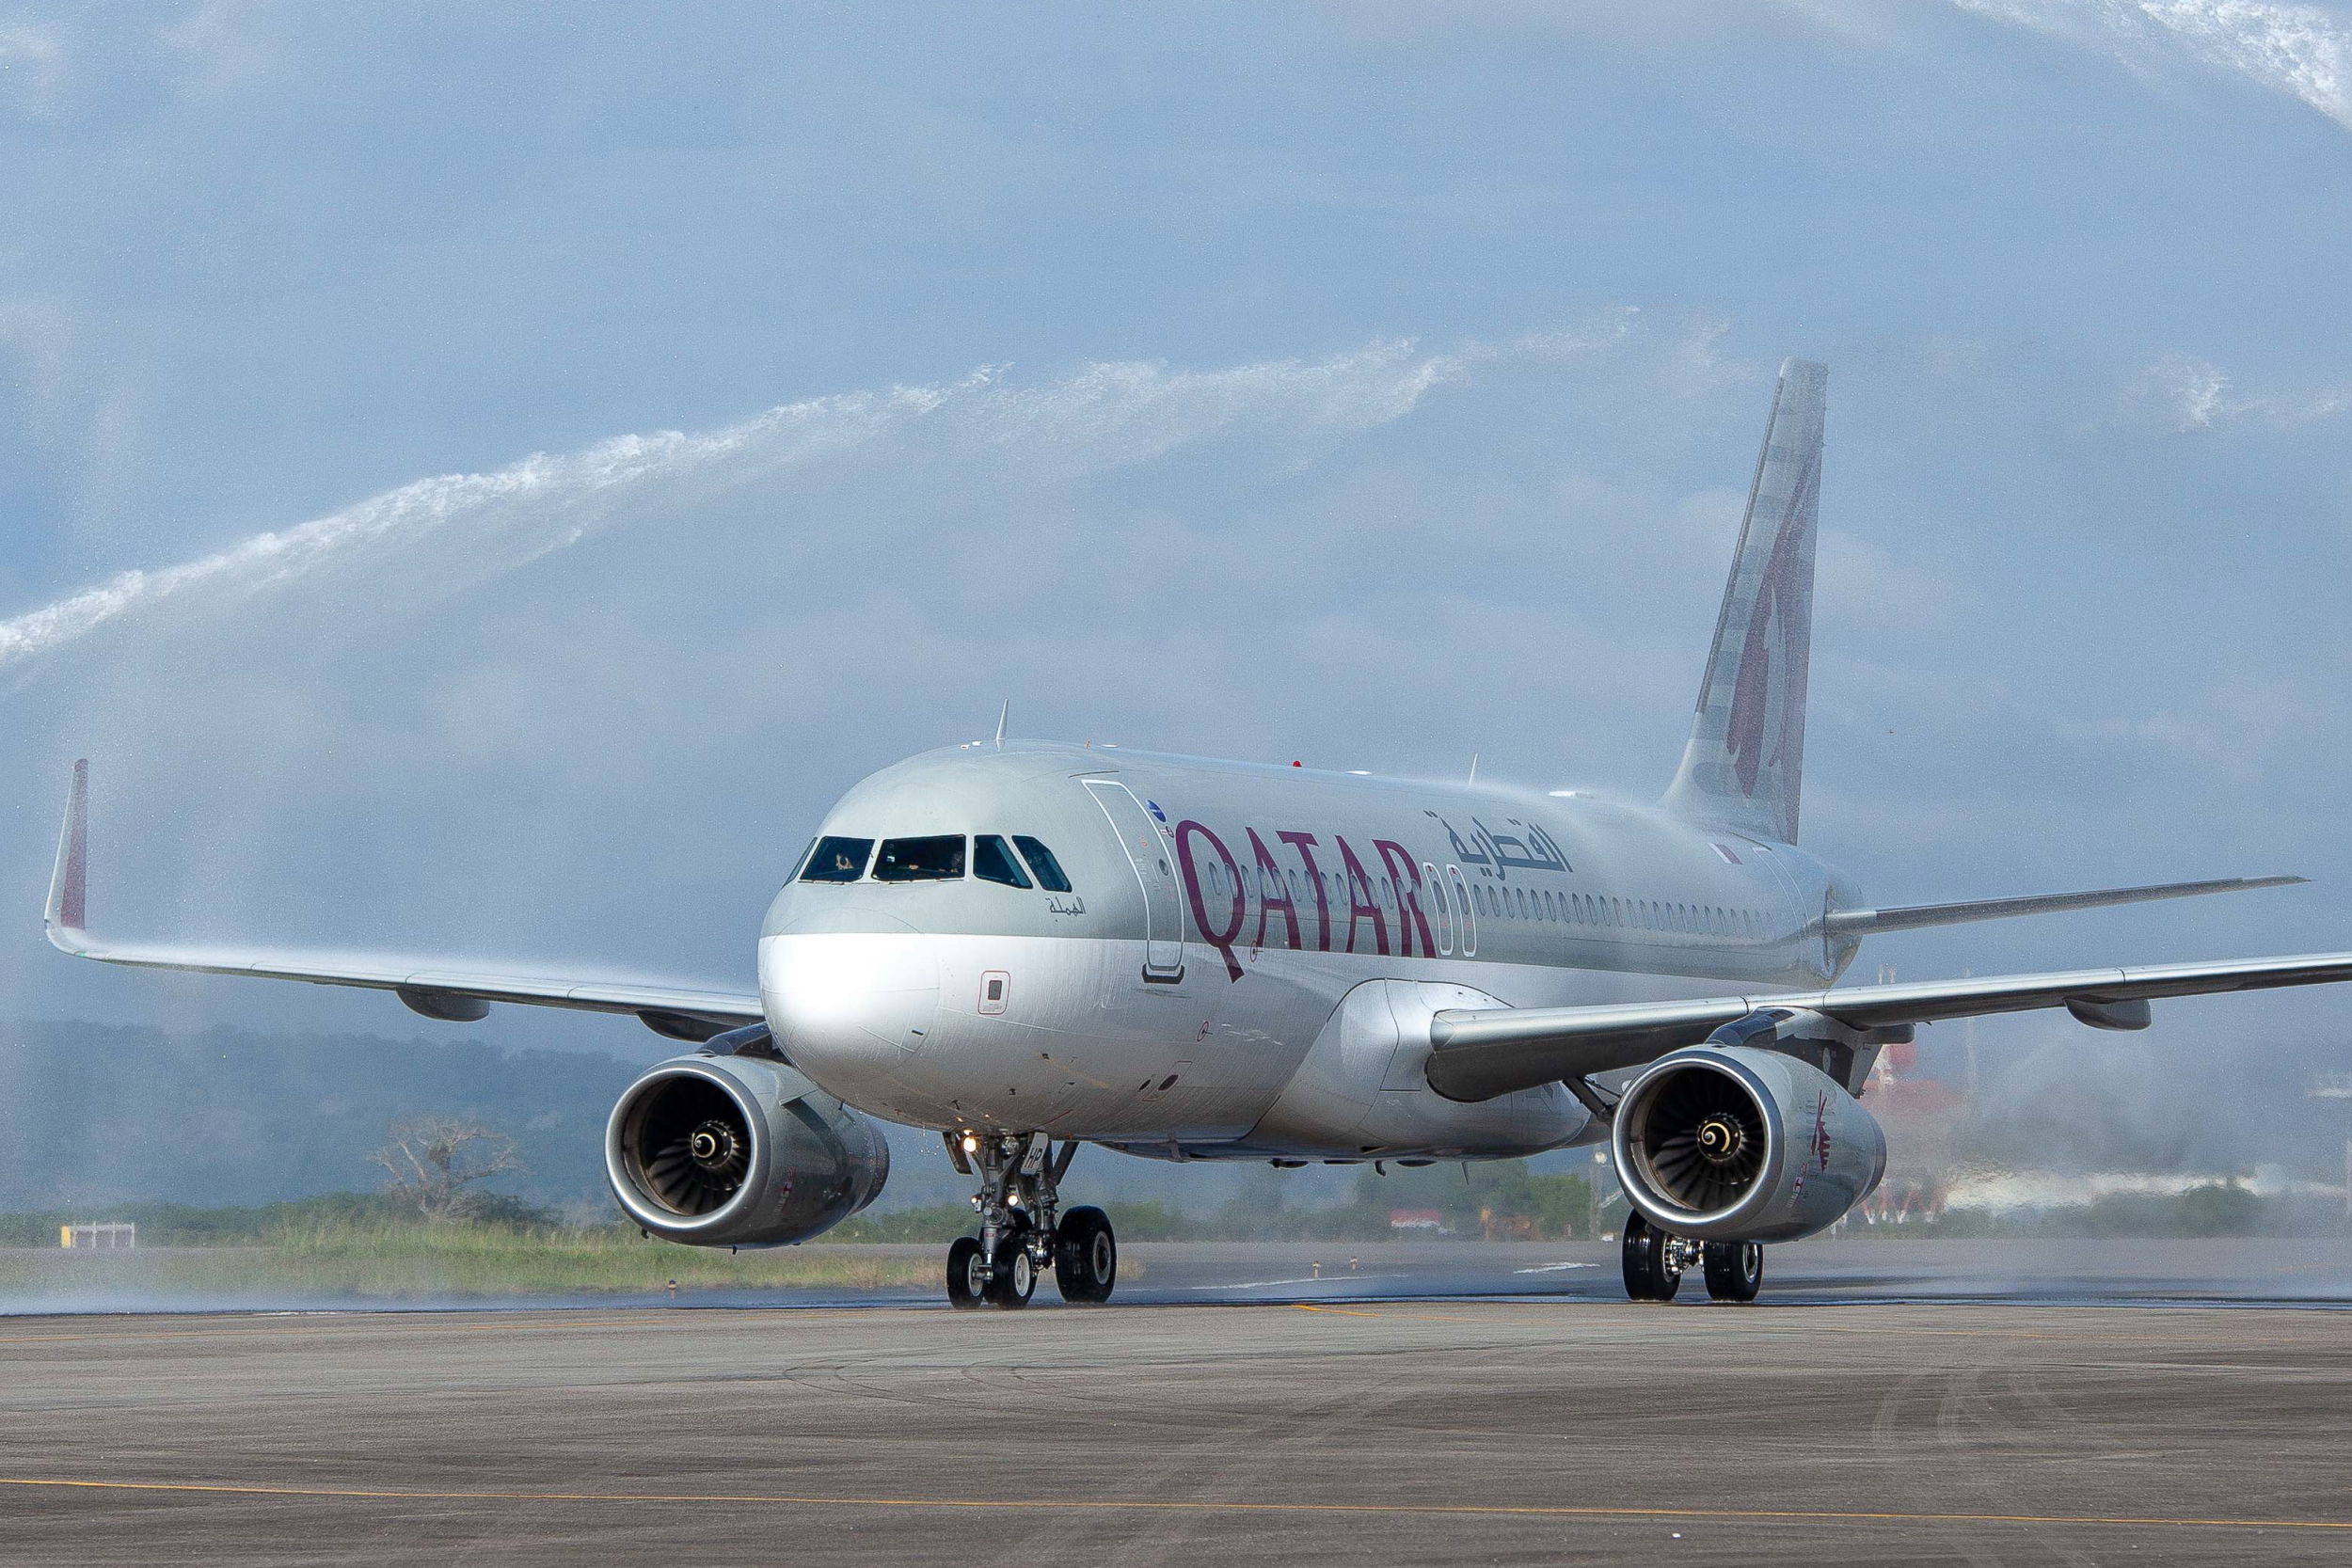 Qatar Airways has launched non-stop flights between Doha and Moi International Airport in Mombasa, Kenya. Qatar Airways will operate its service to Mombasa with Airbus A320 aircraft, which features 12 Business Class seats and 120 seats in Economy Class. Click to enlarge.